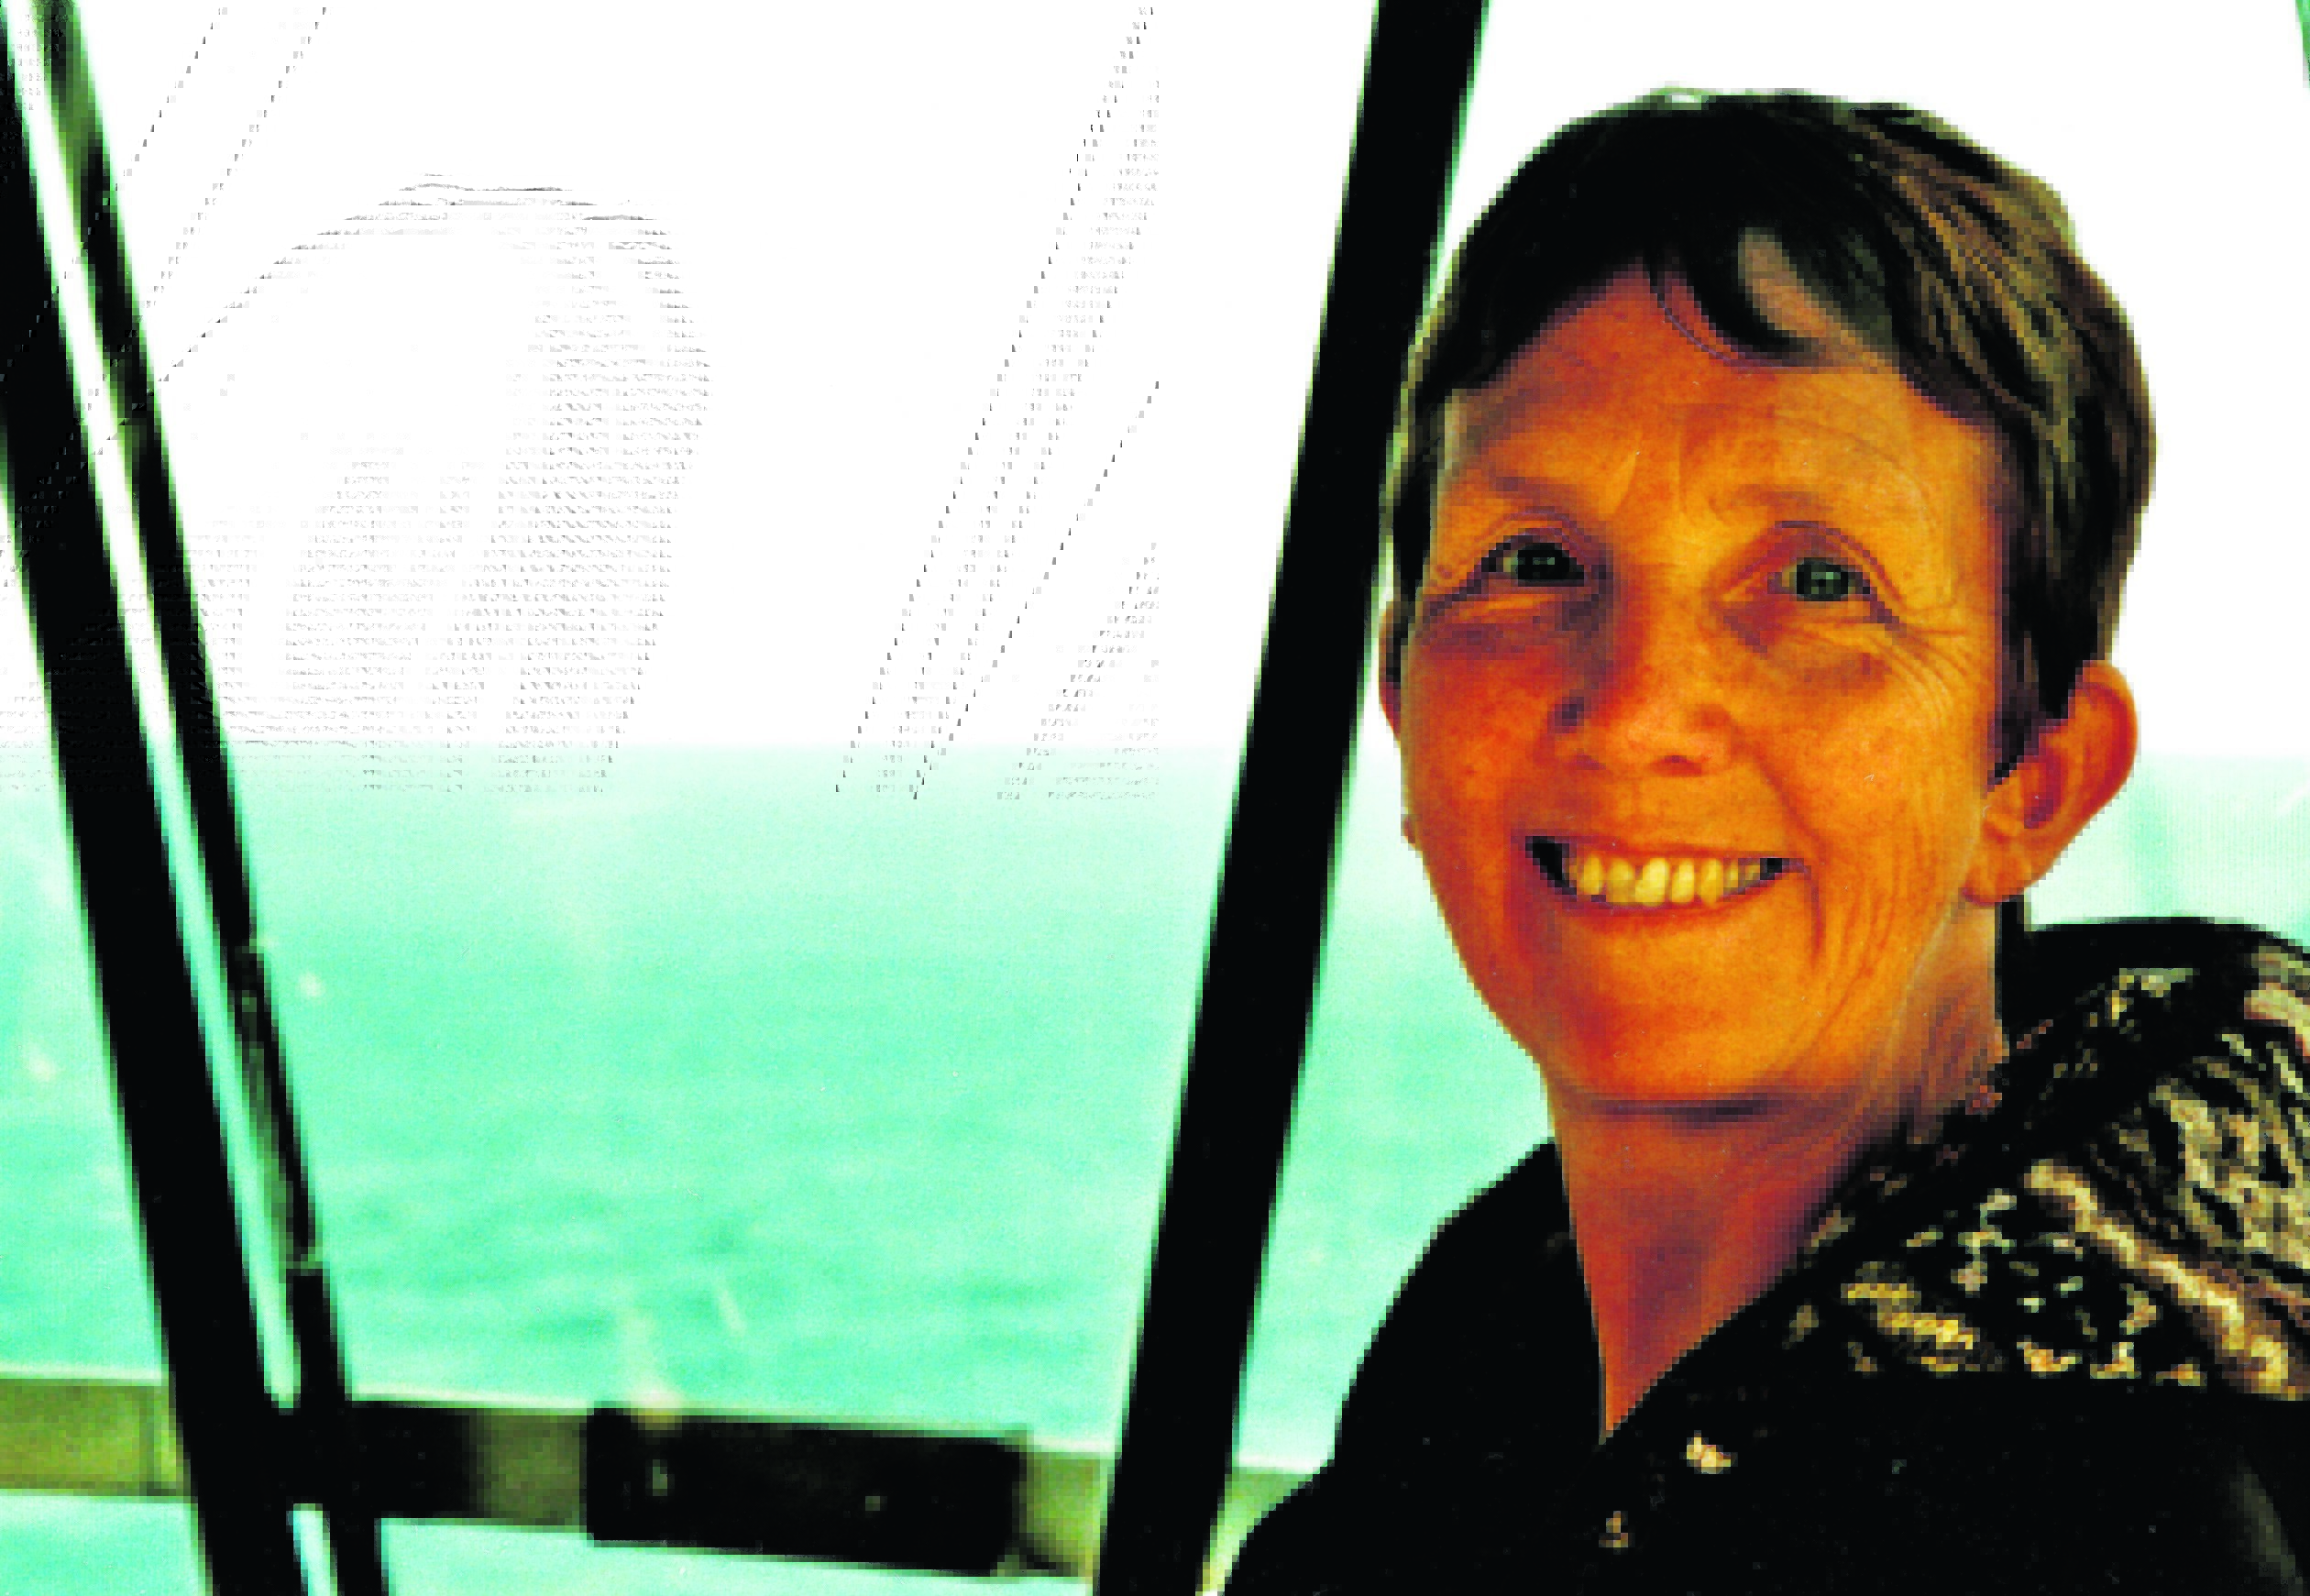 Ann Cleeves has written more than 35 books and created three hit TV series.